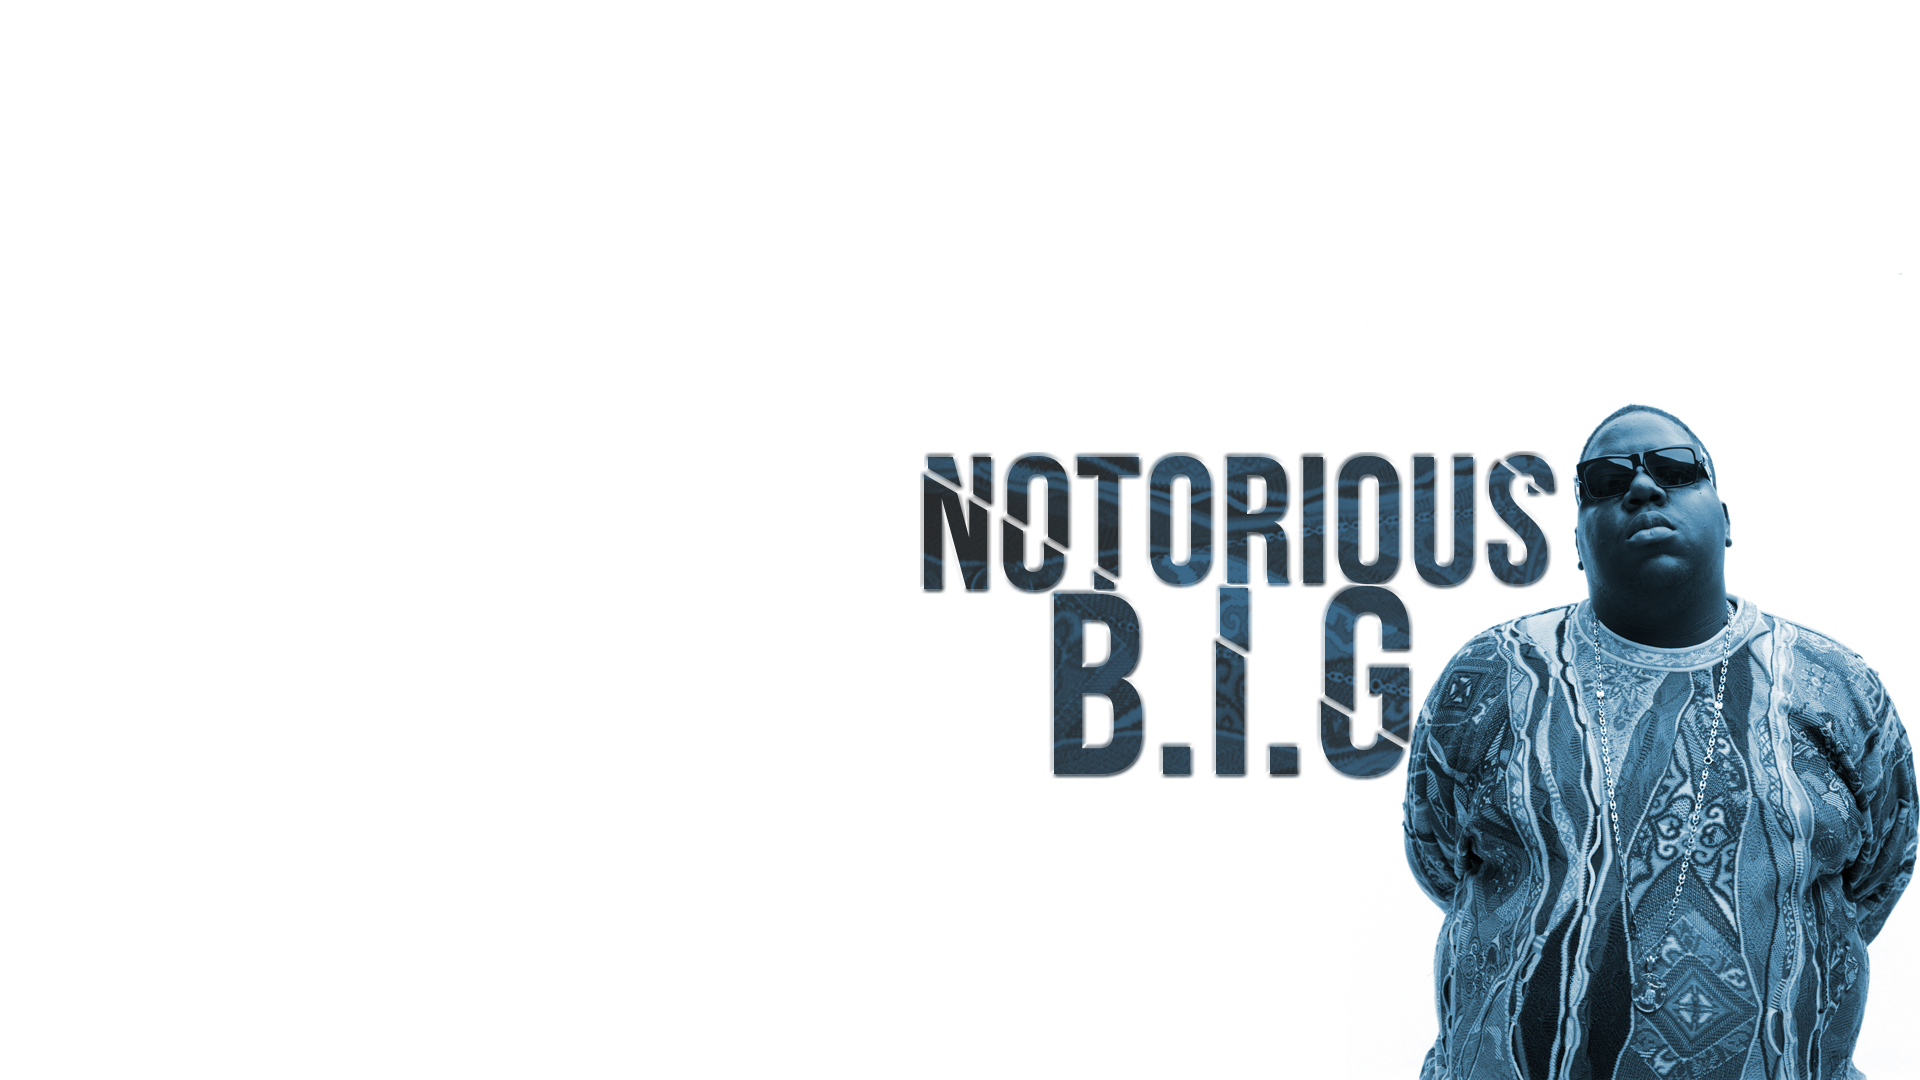 notorious big greatest hits download